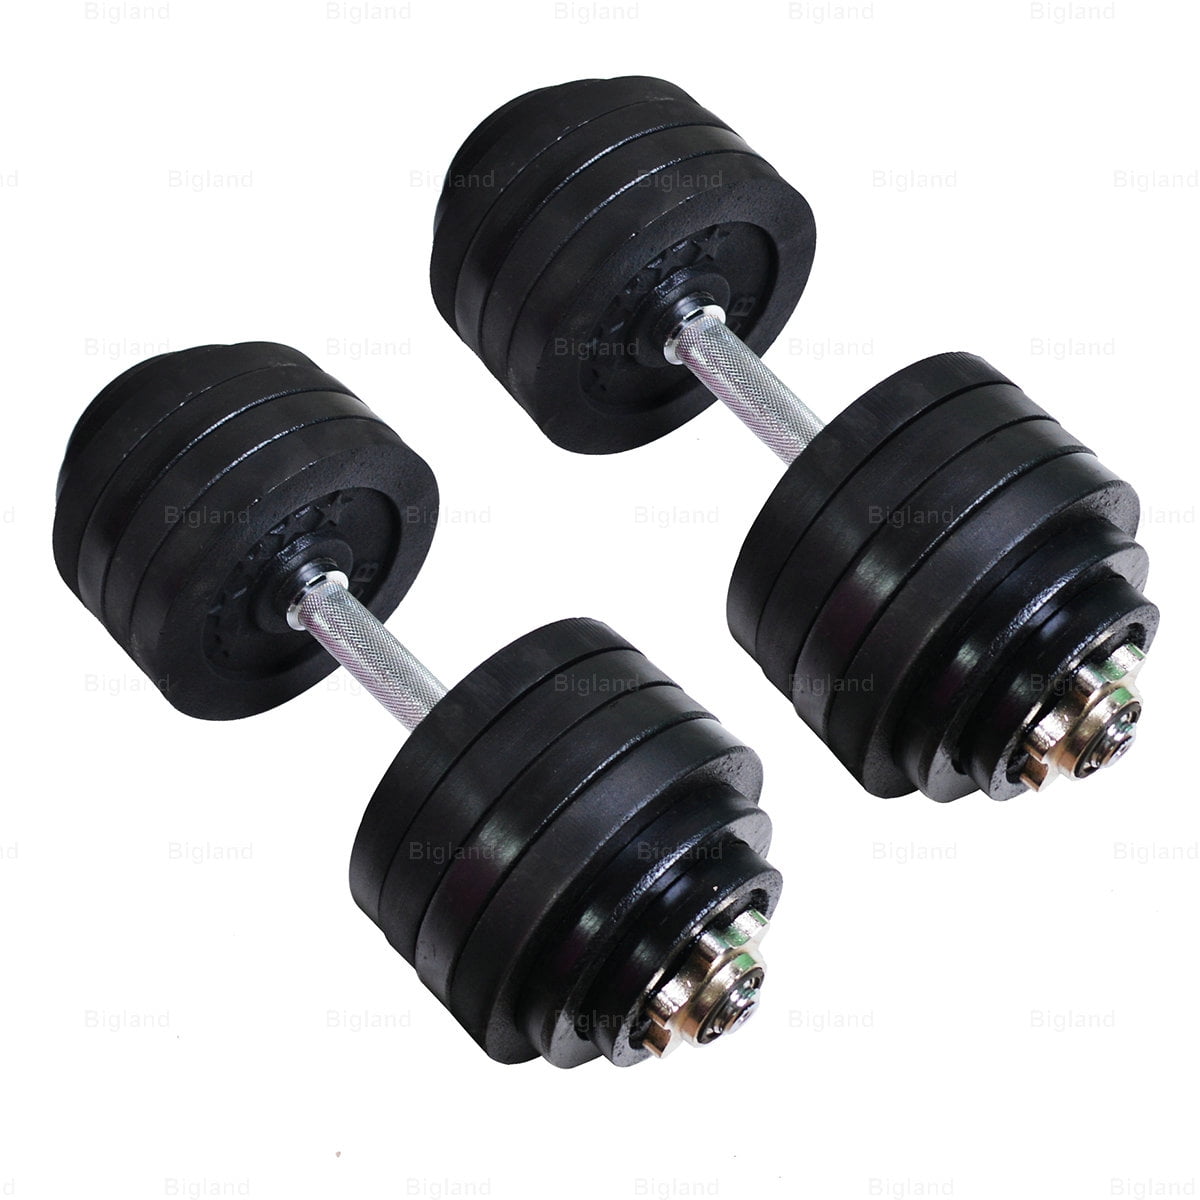 New Weight Dumbbell Set Adjustable Gym Barbell Plates Body Workout 110/66/44LBS 